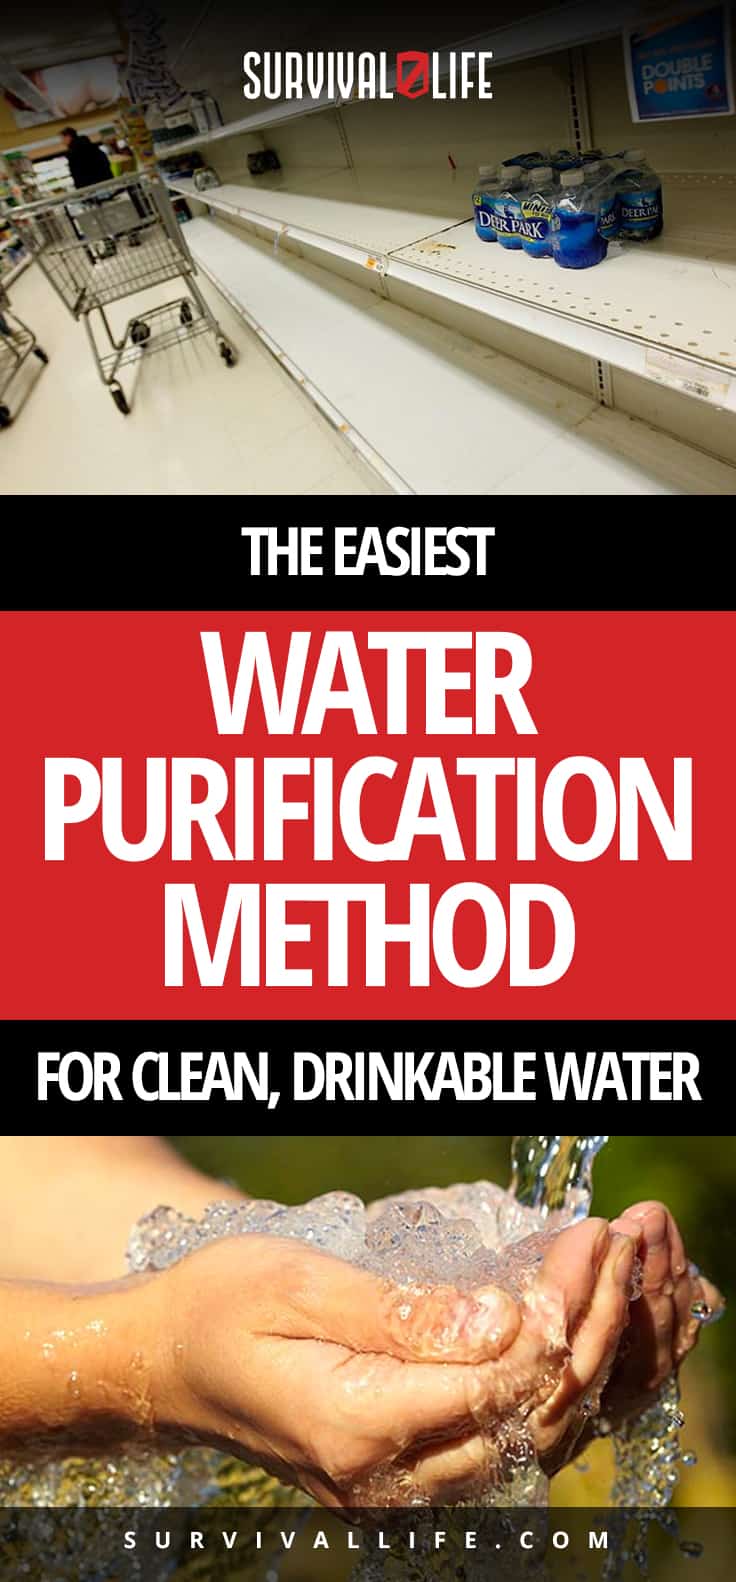 The Easiest Water Purification Method For Clean, Drinkable Water